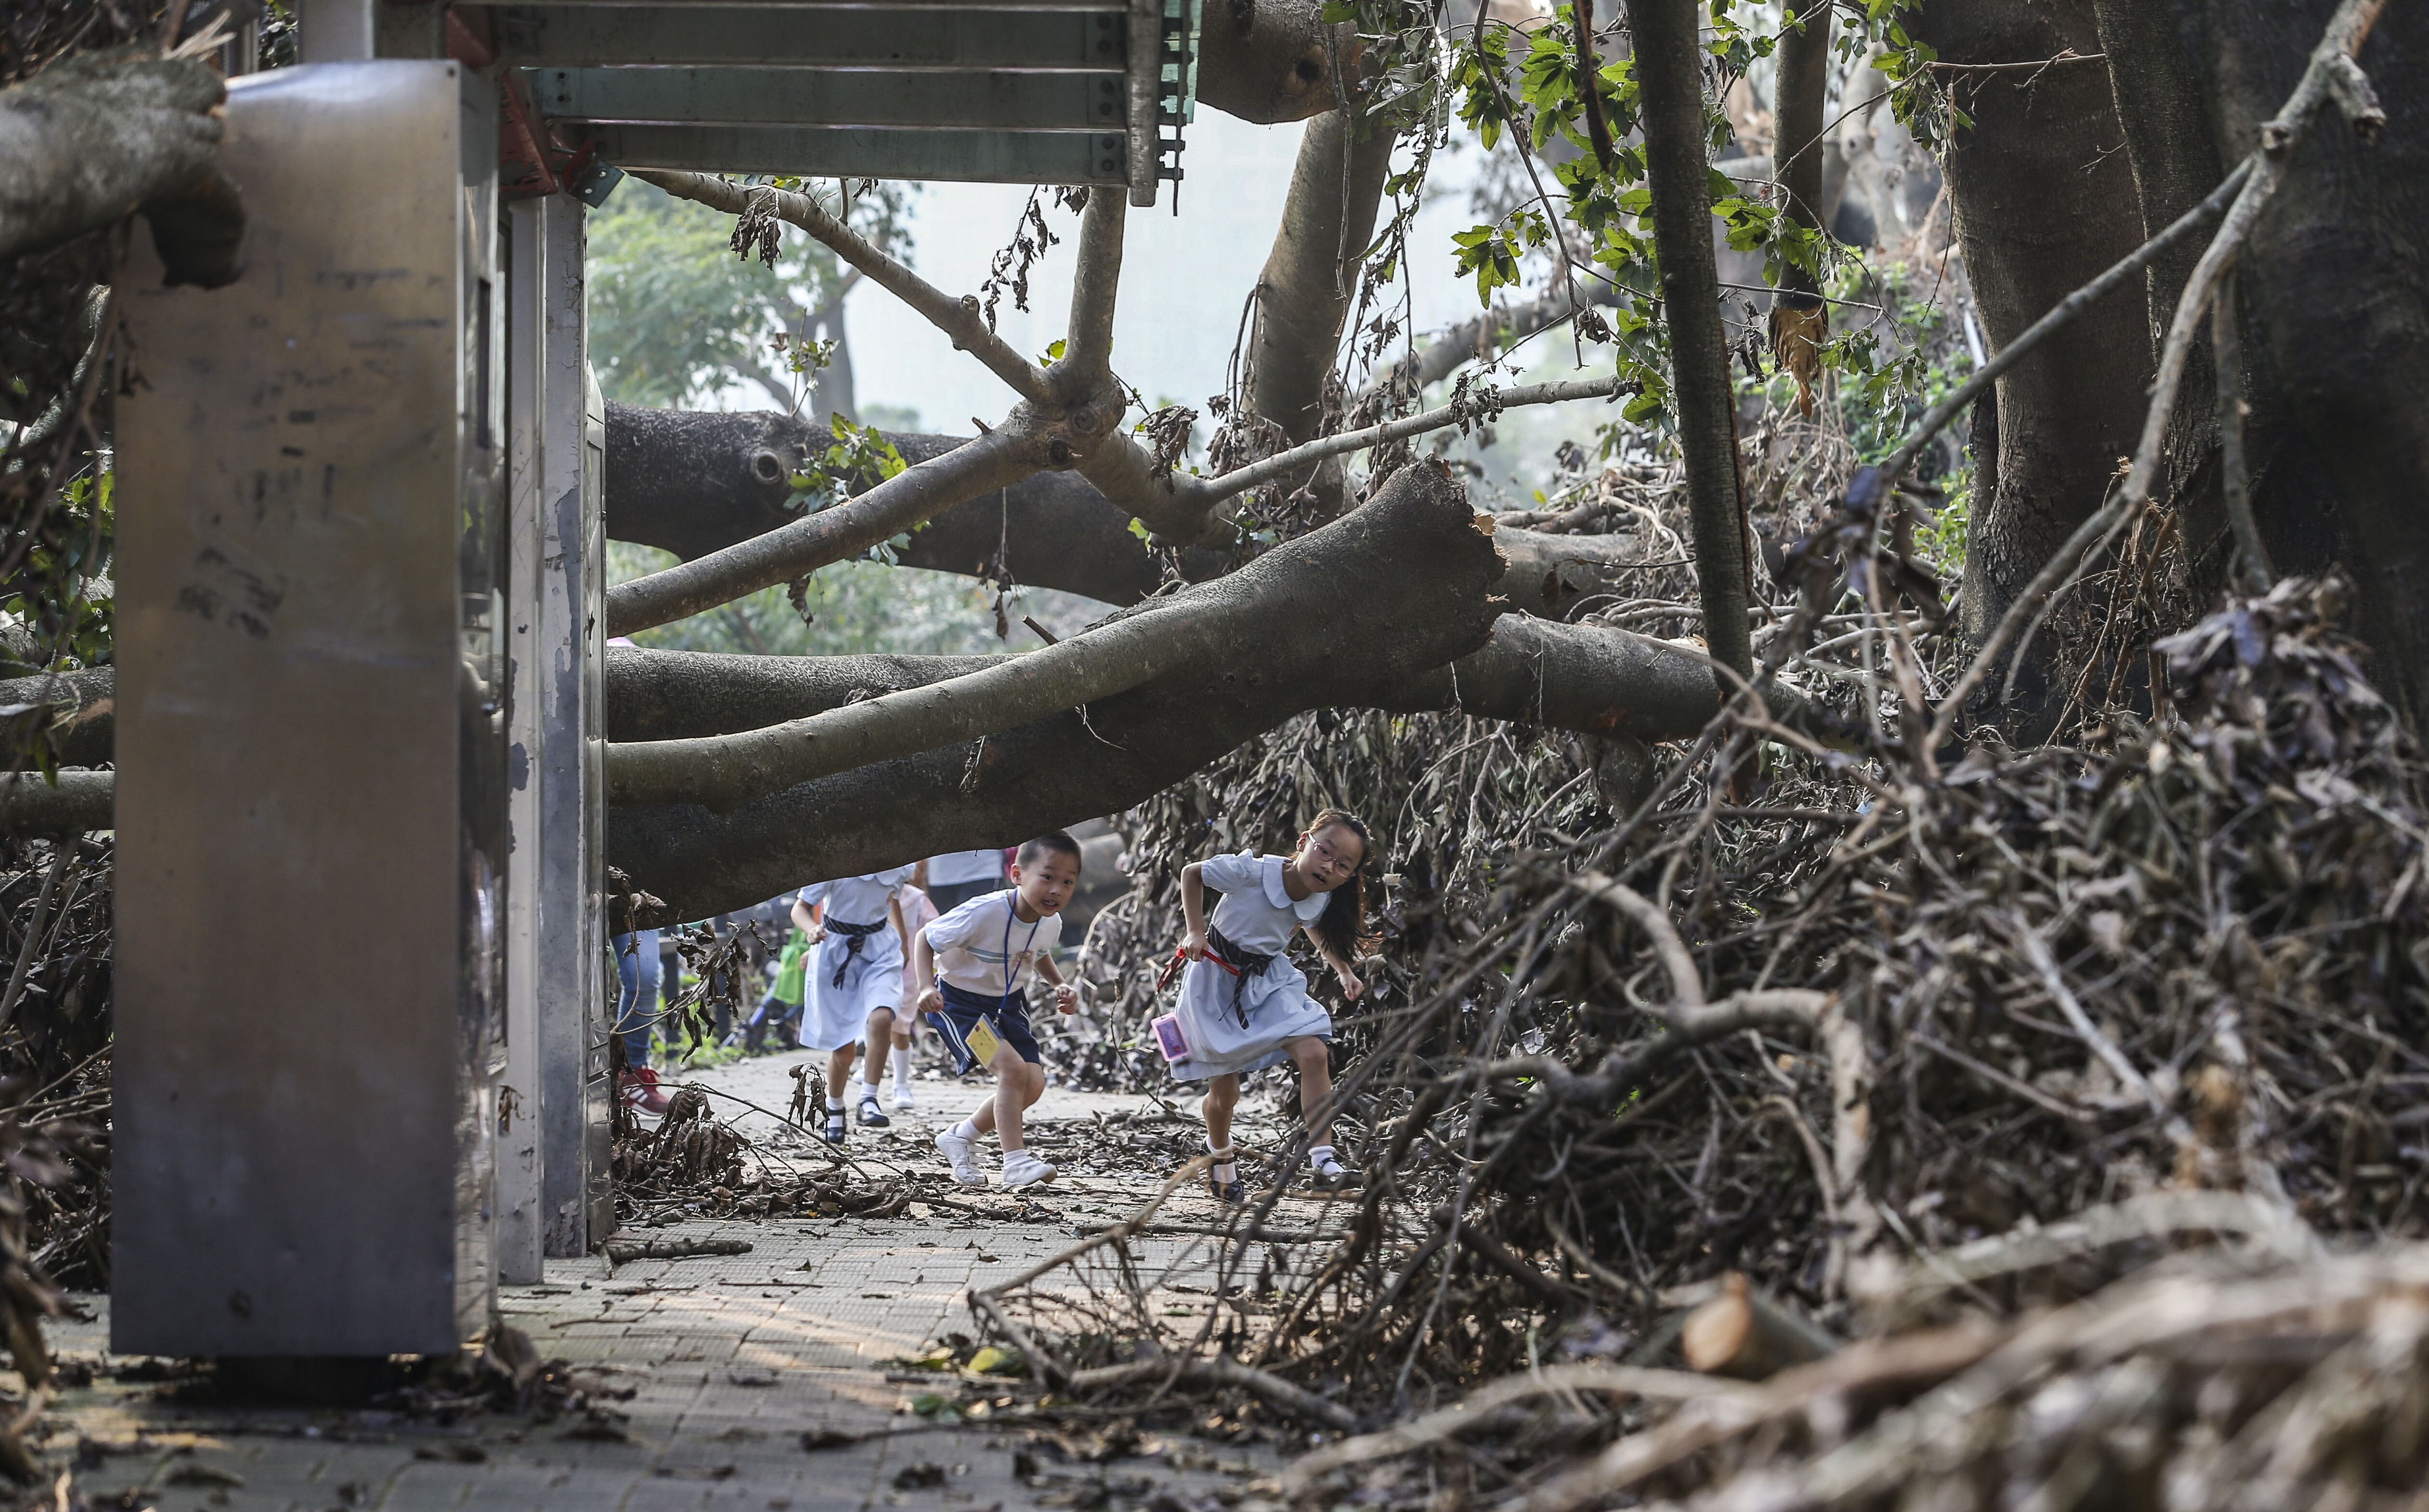 Hong Kong children make their way through trees felled by Typhoon Mangkhut, in Sheung Shui on September 20, 2018. Typhoon Mangkhut, which required the signal No 10 to stay in place for 10 hours on September 16, was the most powerful storm to hit the city since records began in 1946. Photo: Sam Tsang